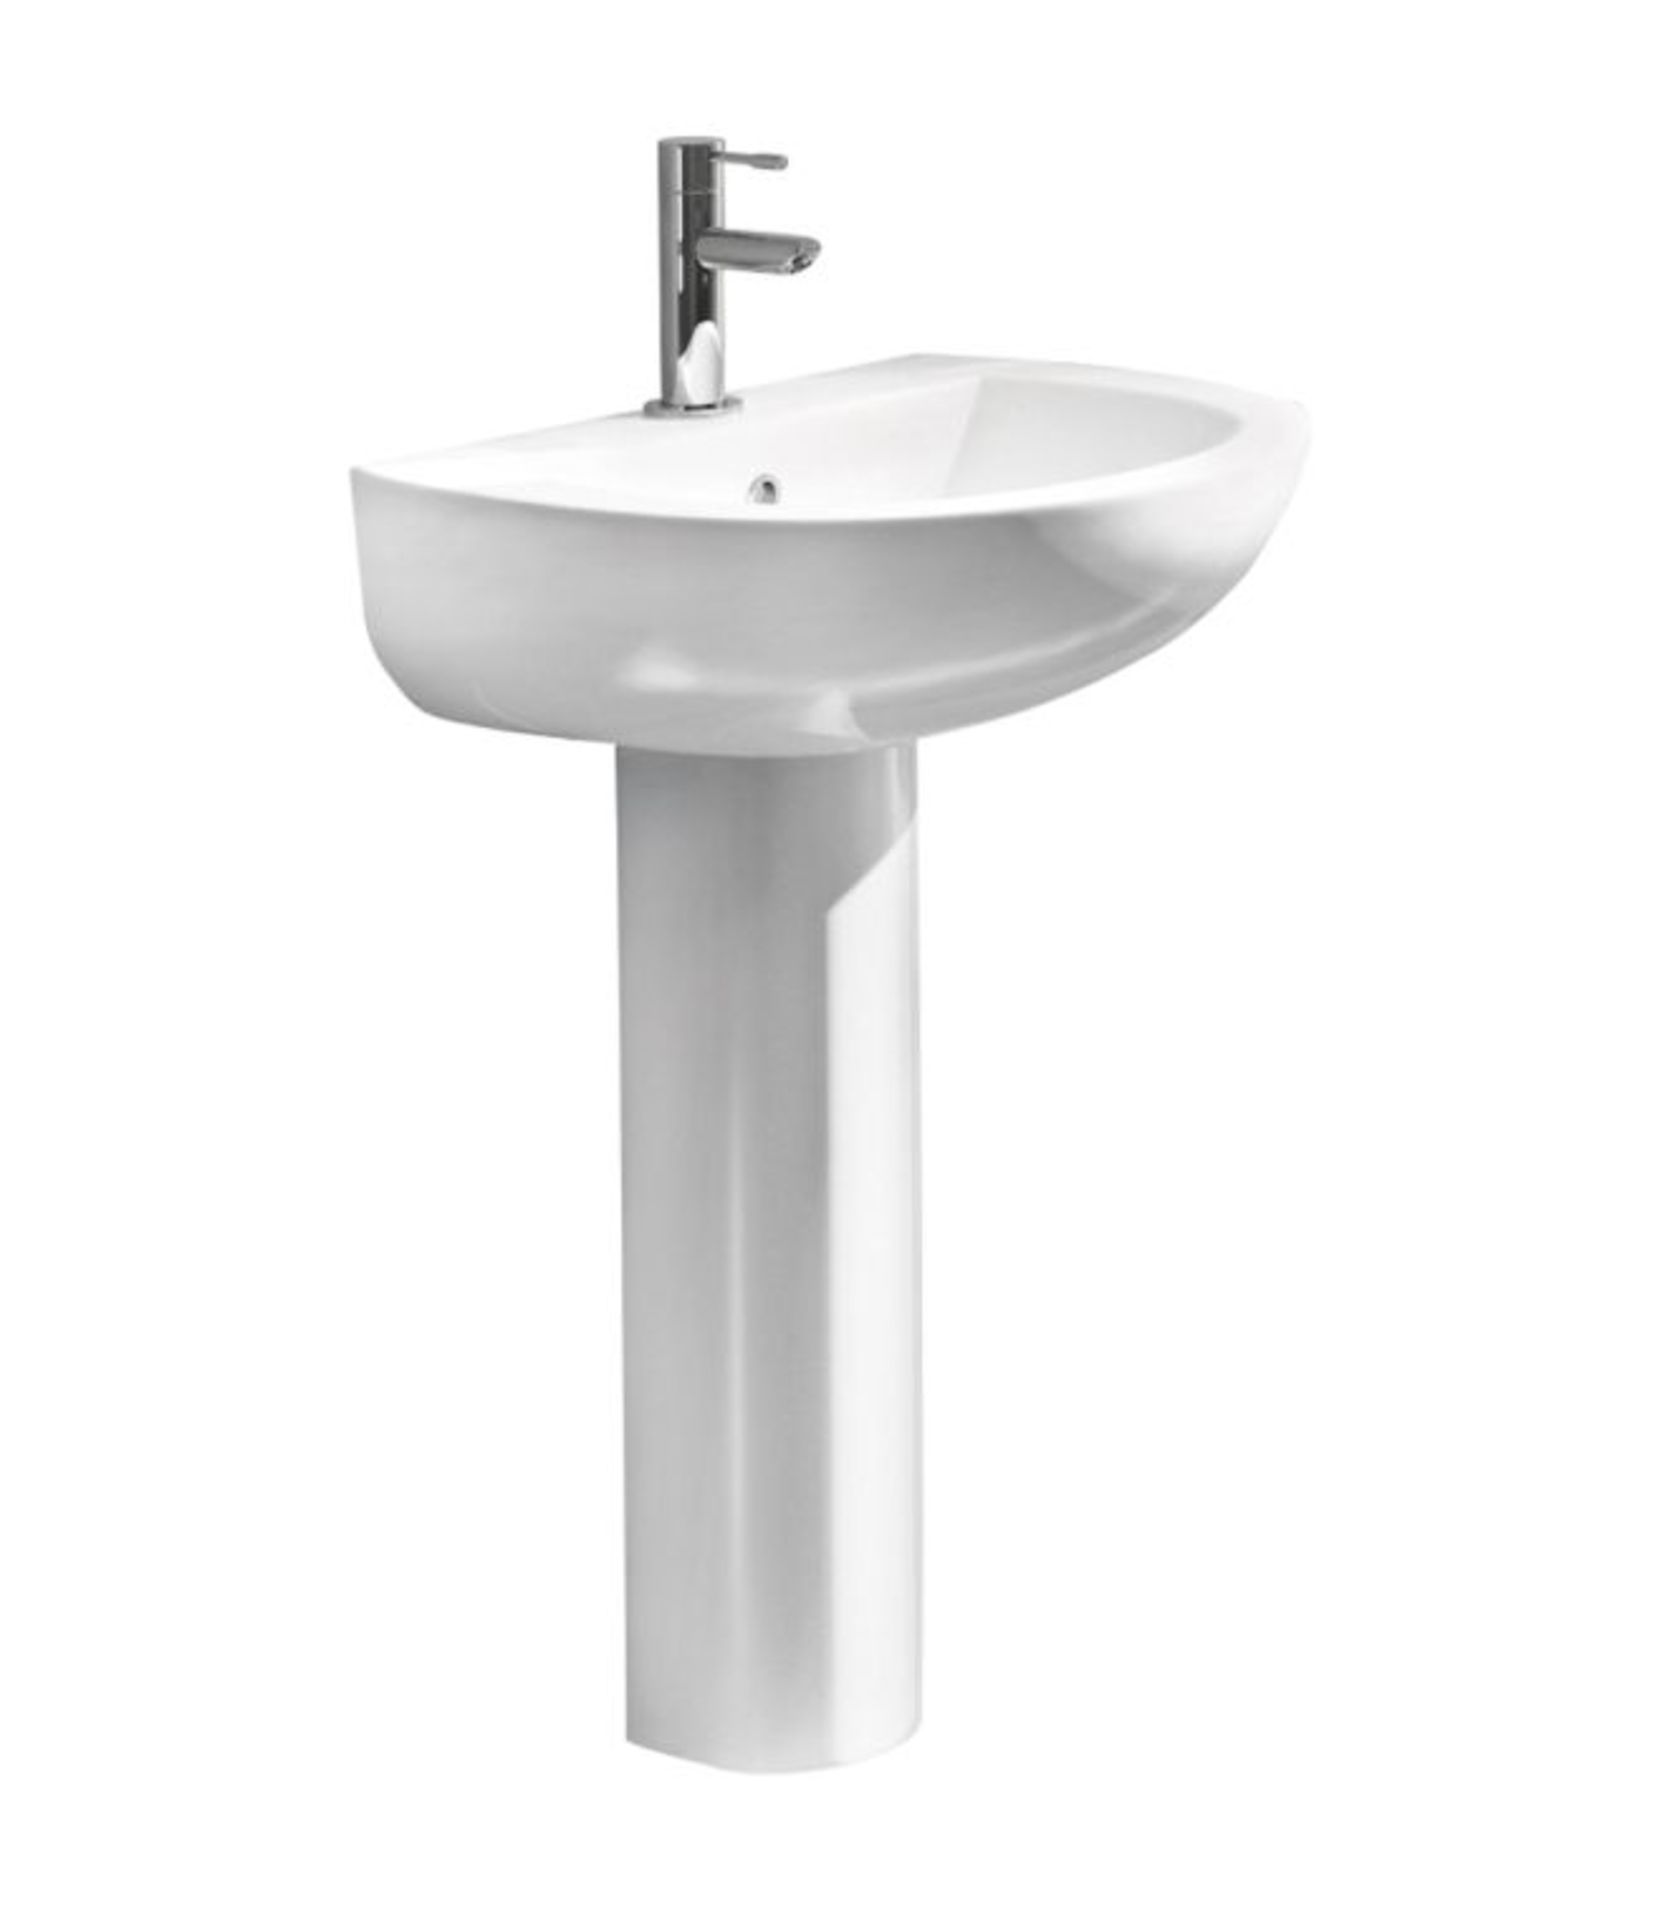 Arley 23702-D 1 Tap Hole 545mm Basin & Pedestal In A Box - Image 3 of 9